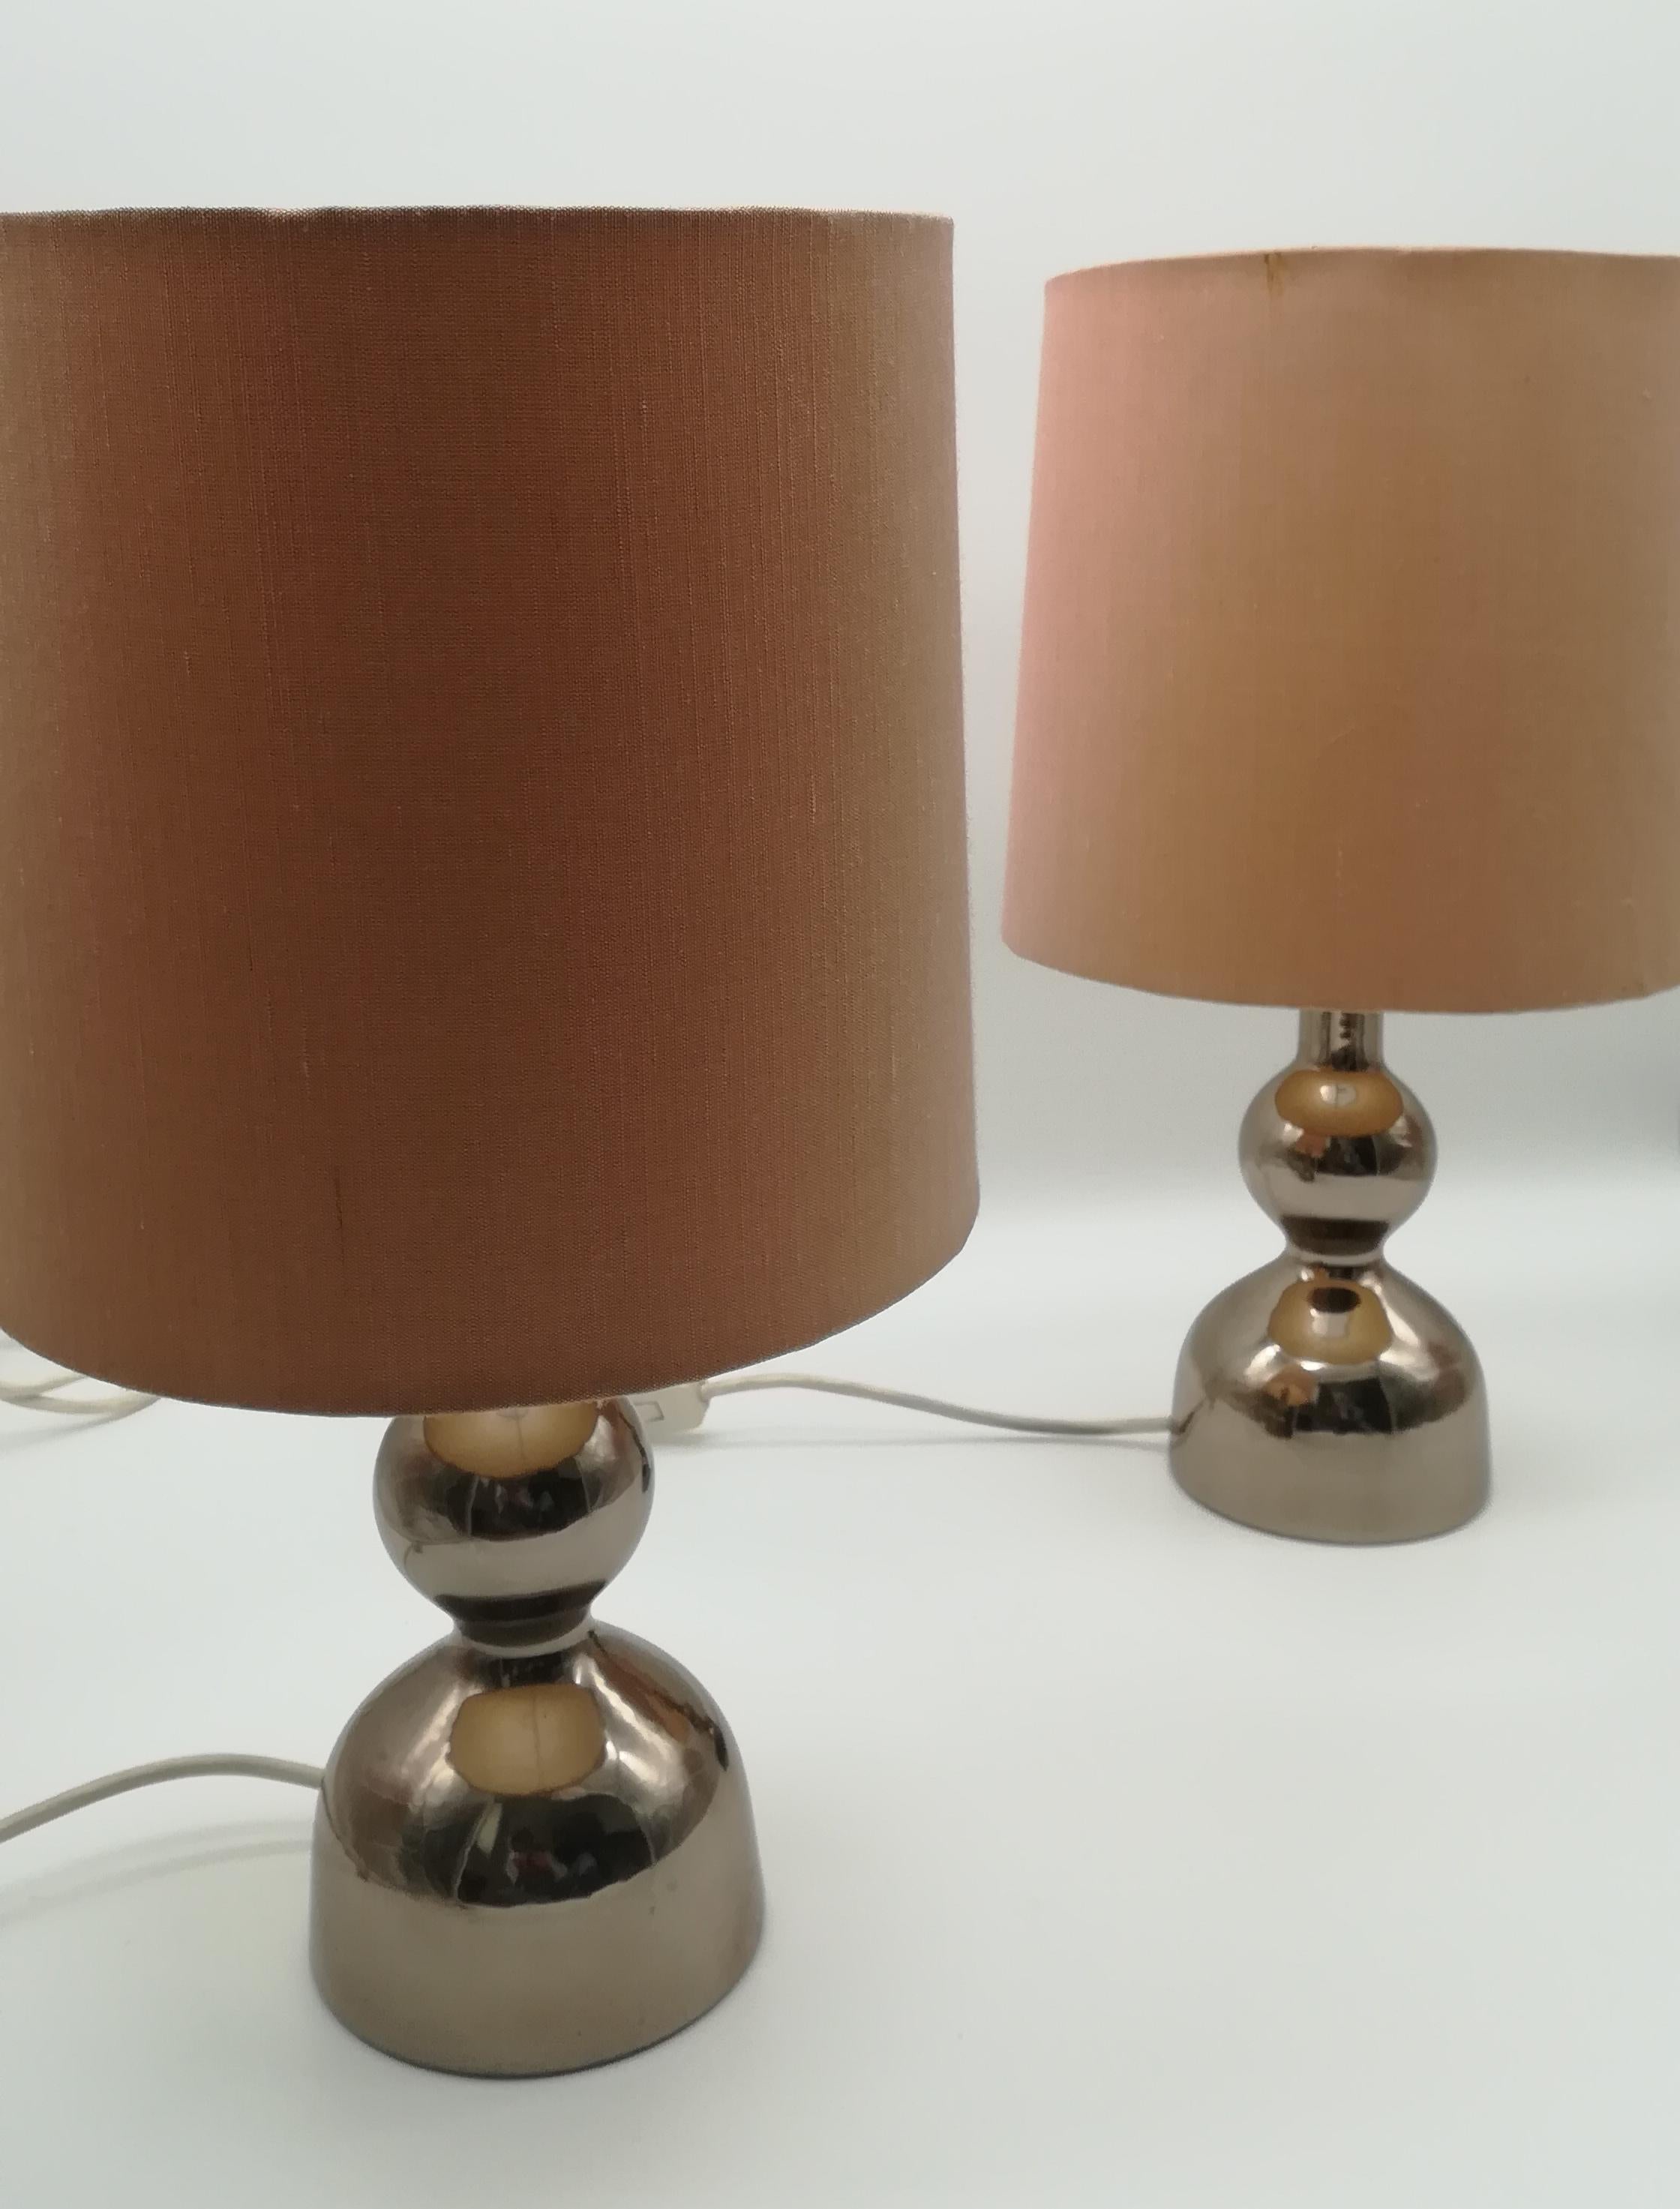 This lovely vintage pair of Mid-Century nightstand lamps from Austria, one of which still bears its label identifying the original Kalmar design, elegantly echoes Space Age style or else Stilnovo design.
Austrian designer Julius Theodor (J. T.)